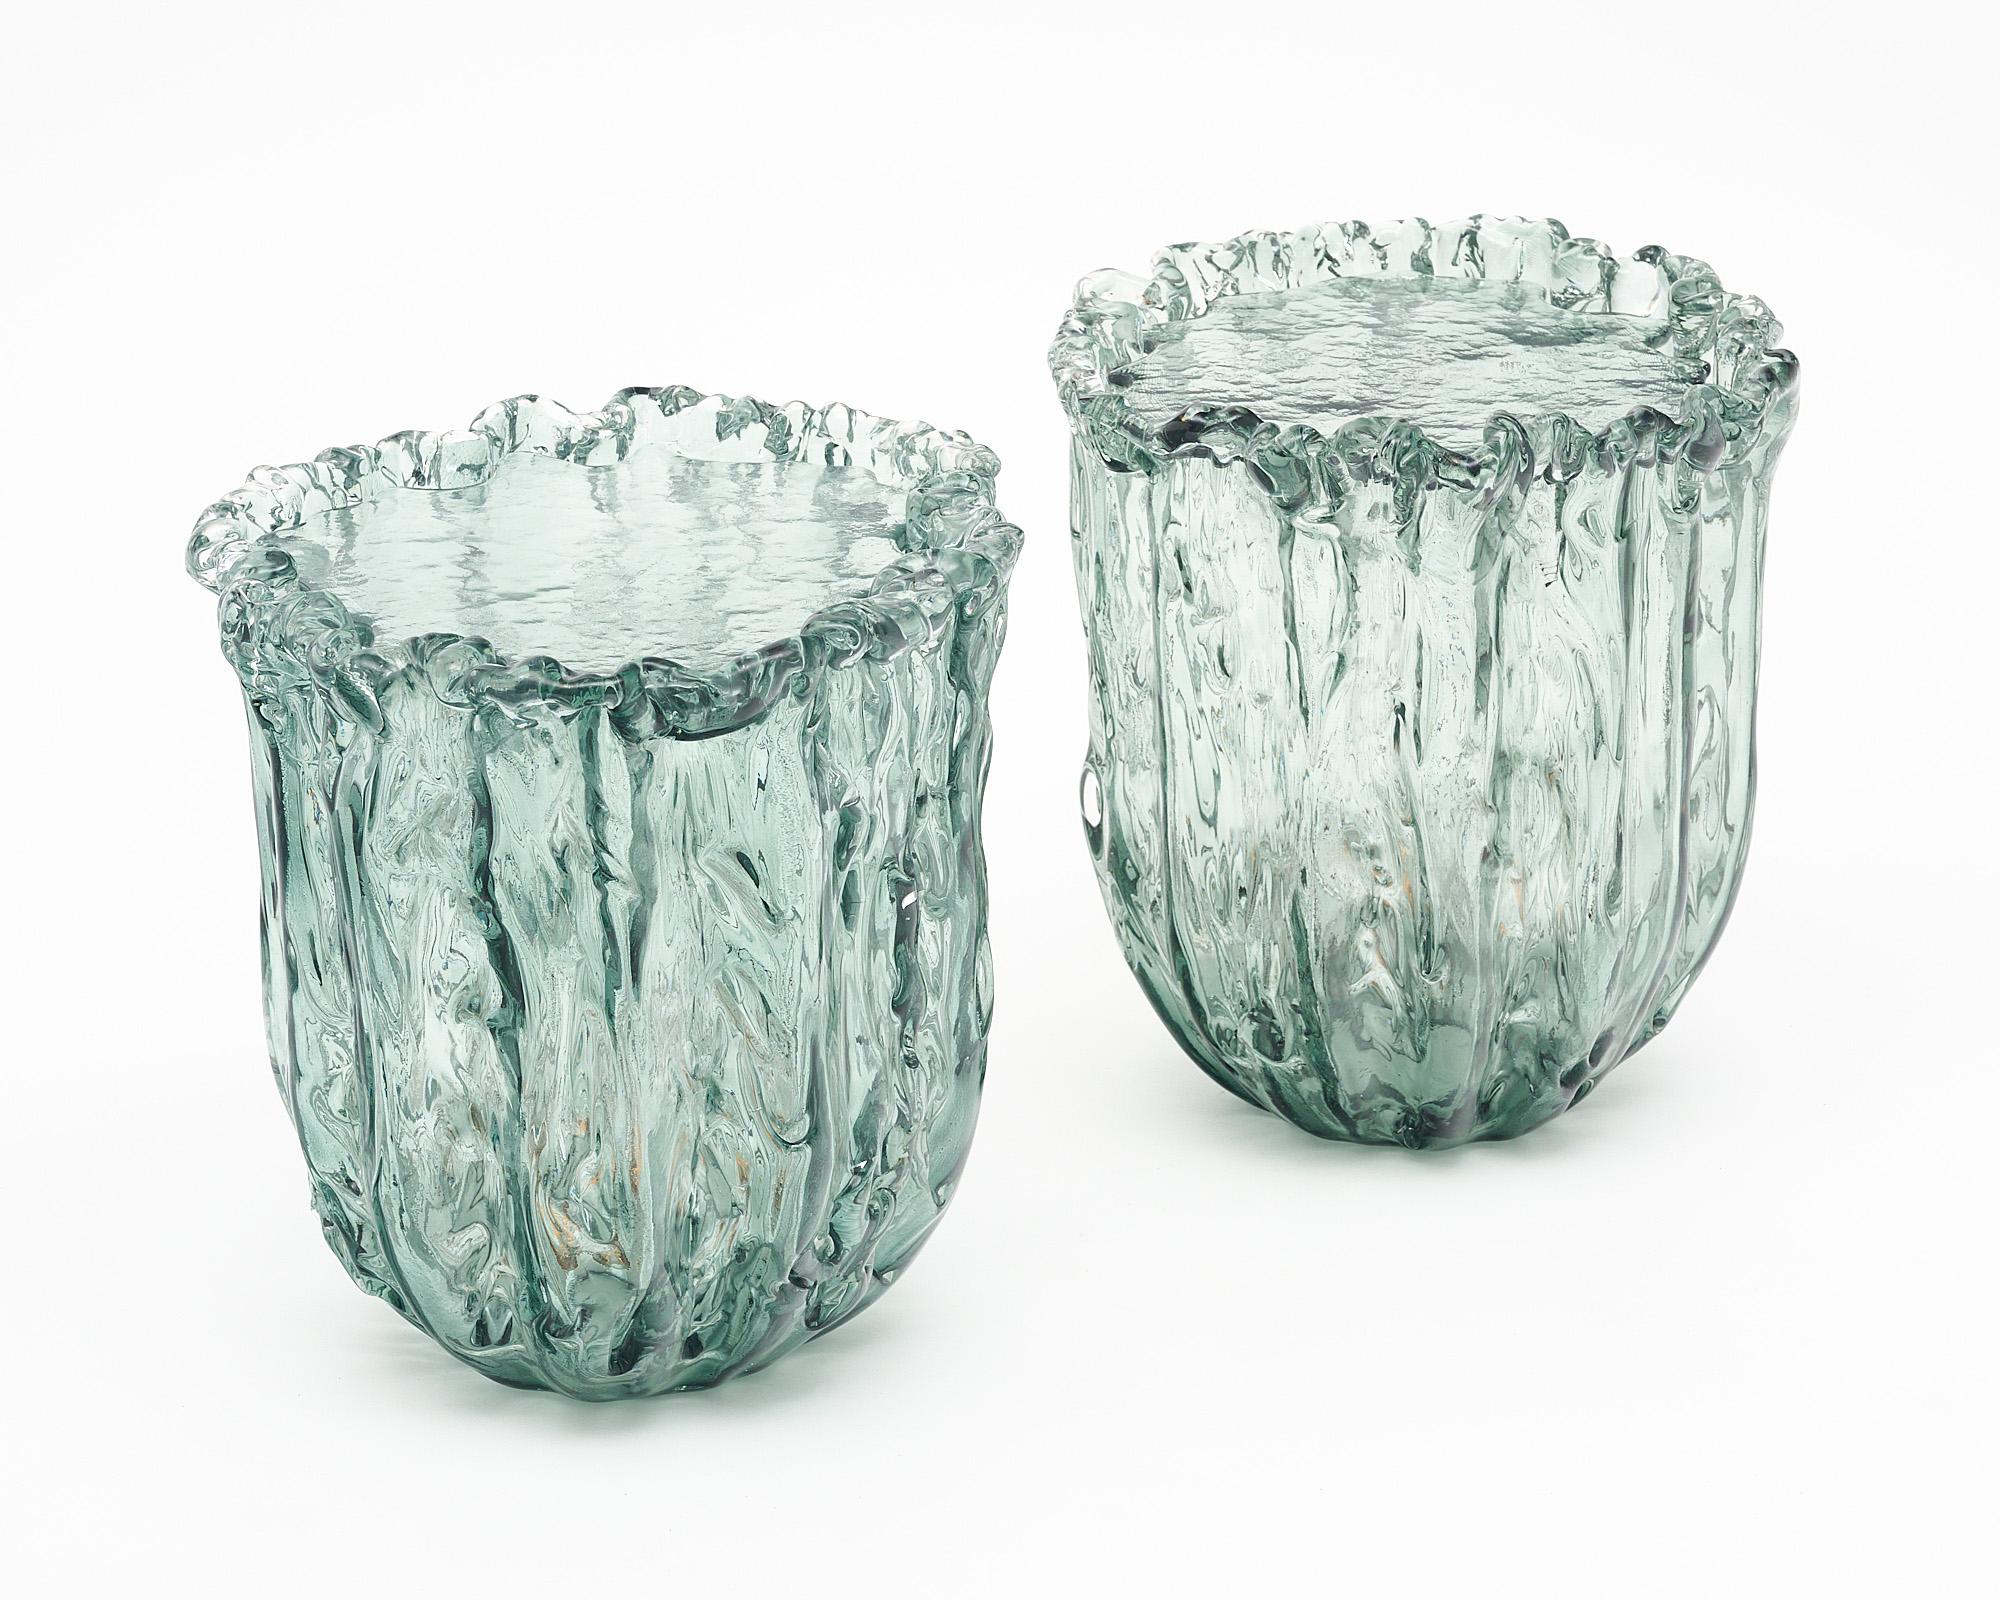 Pair of Naoto Fukasawa glass side tables created in Murano, Italy. The tables are hand-blown with an organic shape. A separate glass cover fits perfectly into the top. They are electrified within to create a beautiful glow as the light passes